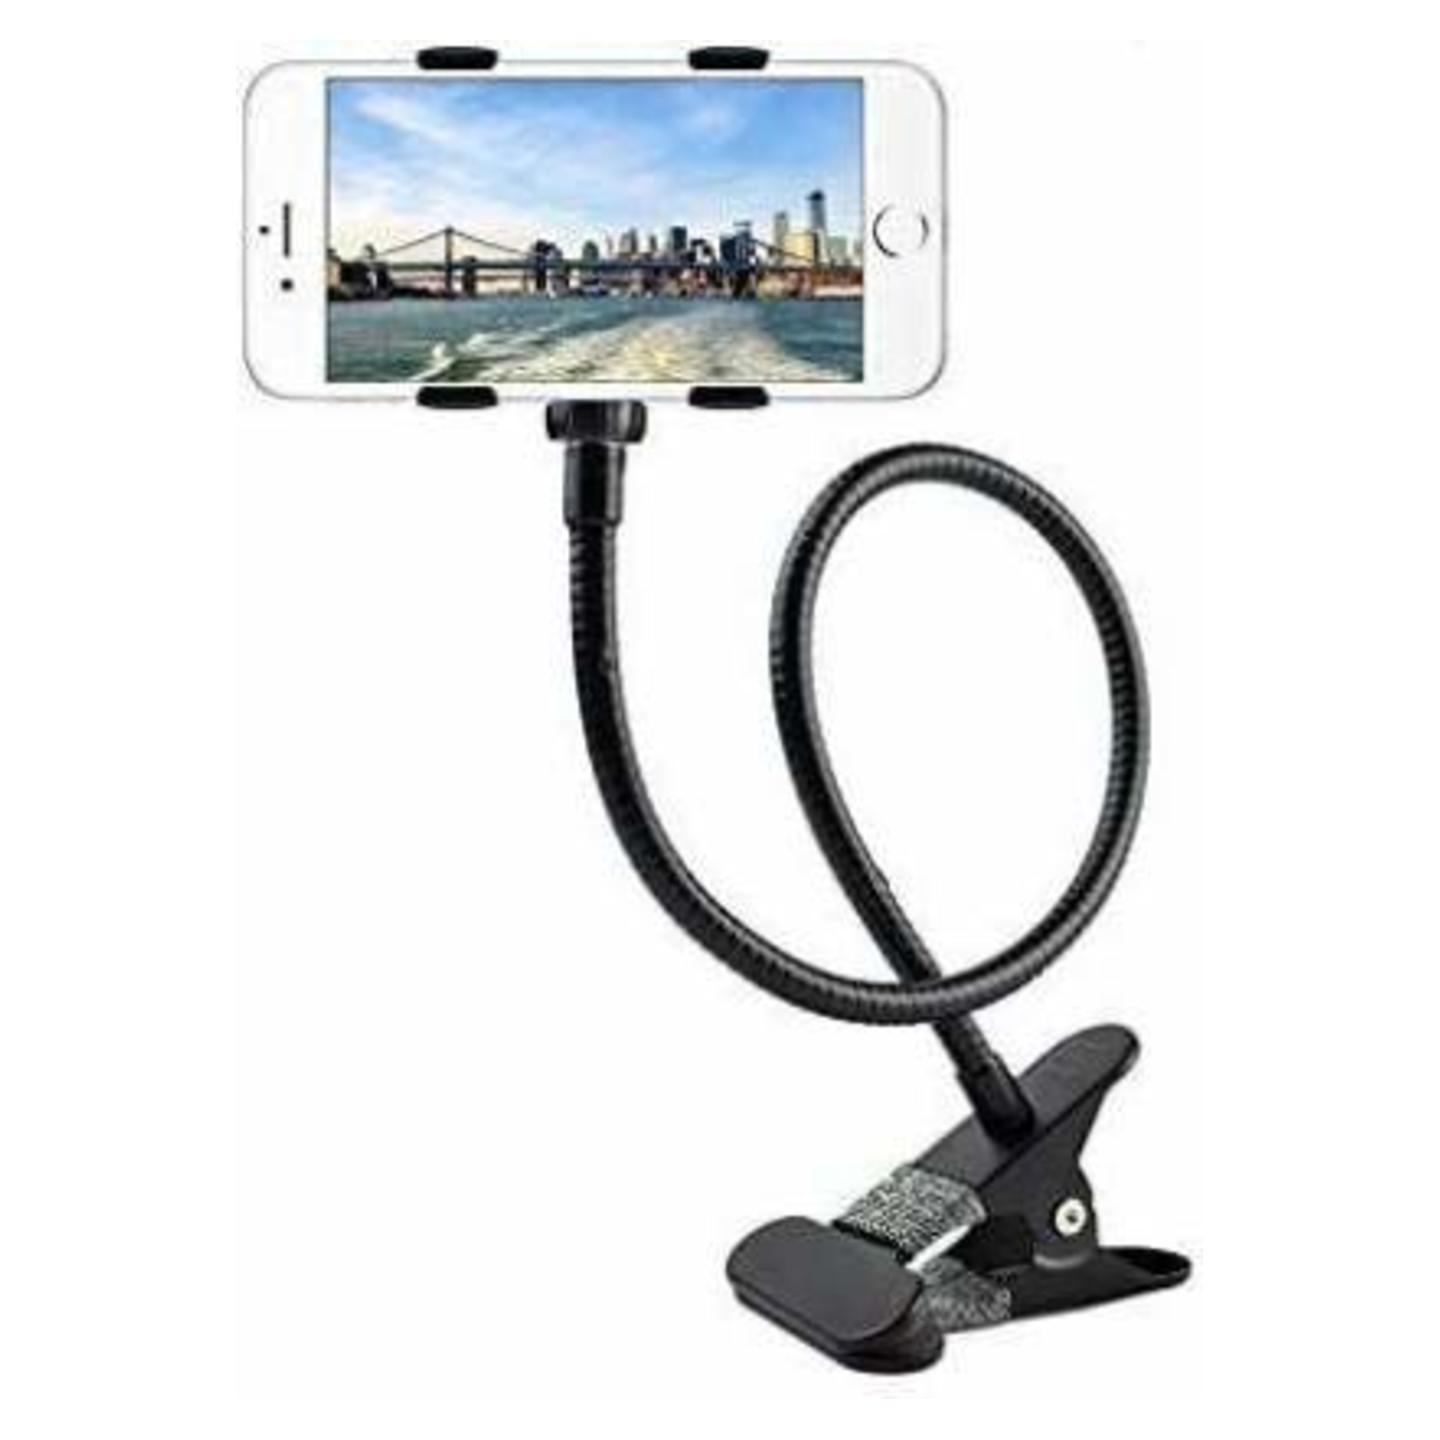 Metal Lazy Stand | Upgraded Metal Body Universal Flexible Lazy Stand Long Arm Mobile Holder Stand